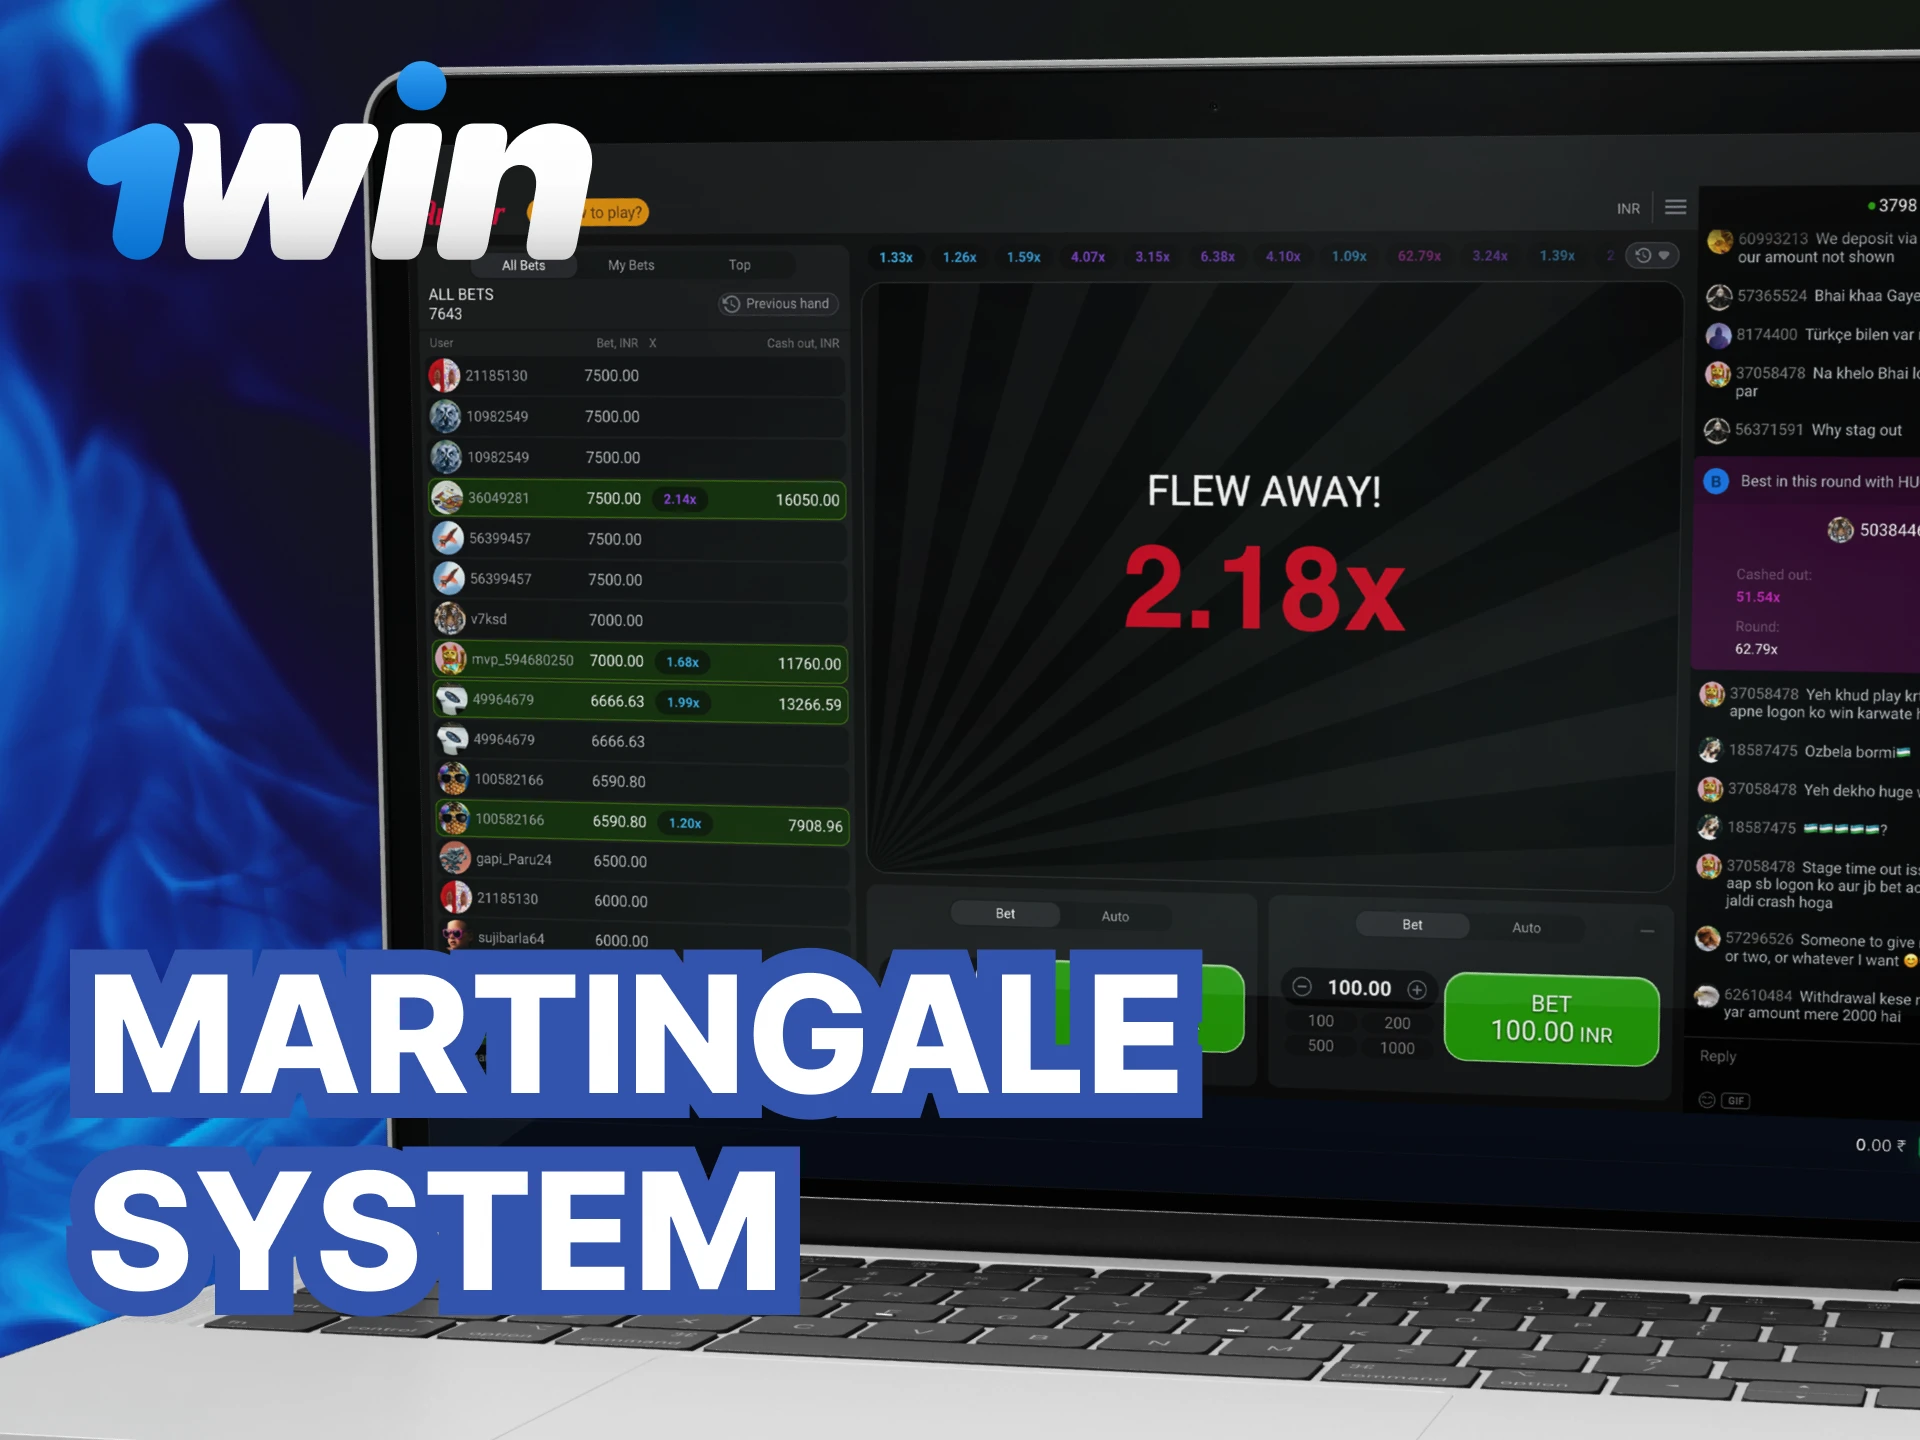 What is the Martingale system for playing in the Aviator game at 1Win casino.